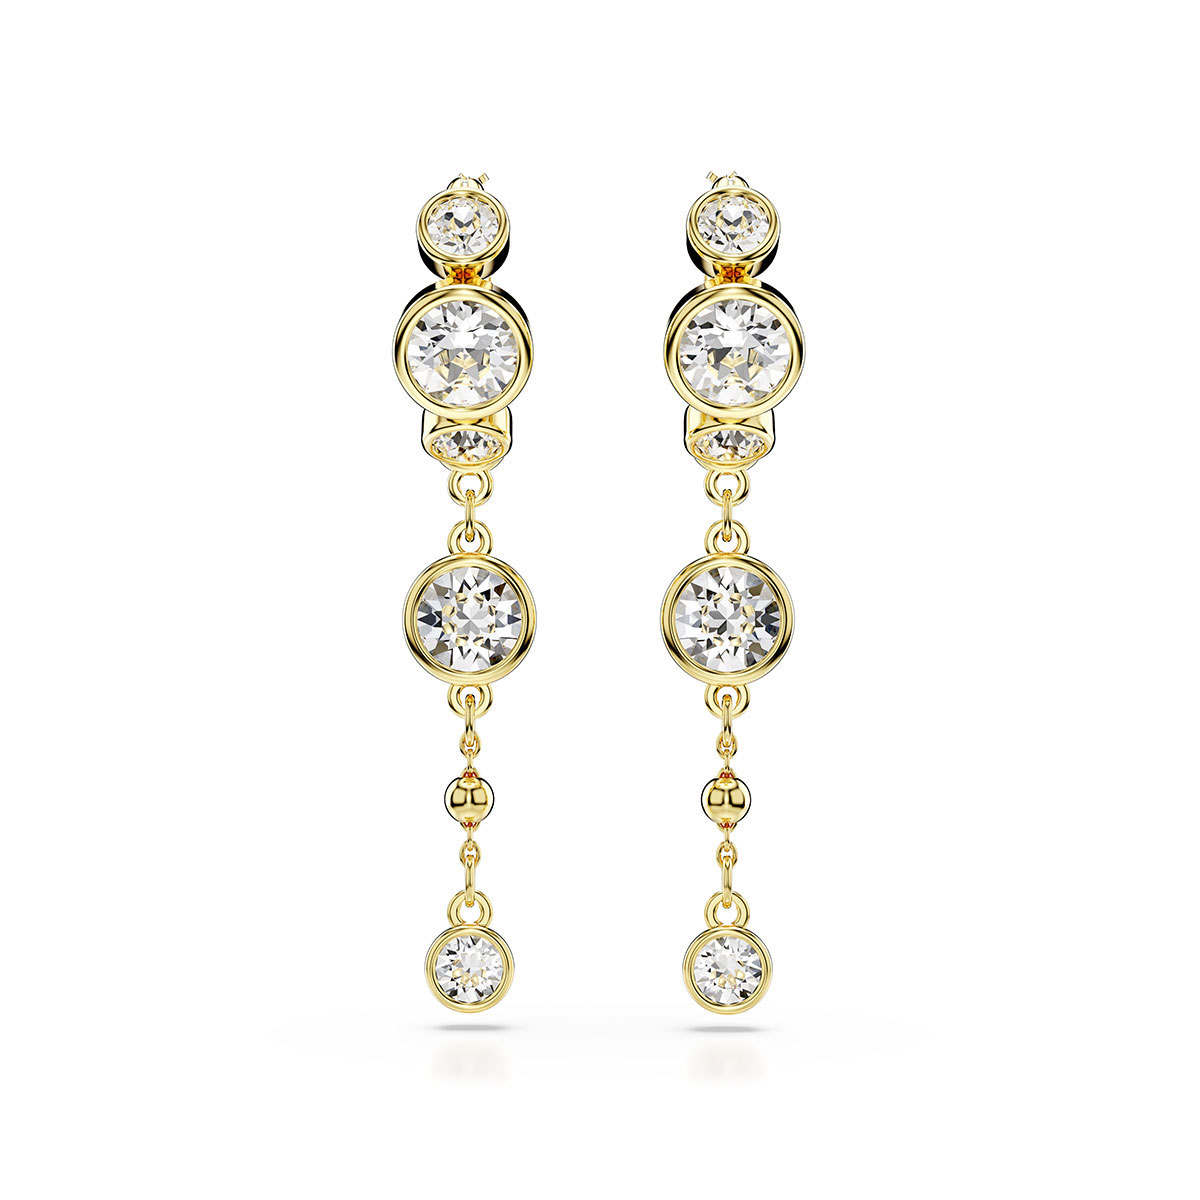 Swarovski Imber Drop Earrings - White with Gold Tone Plating 5680097